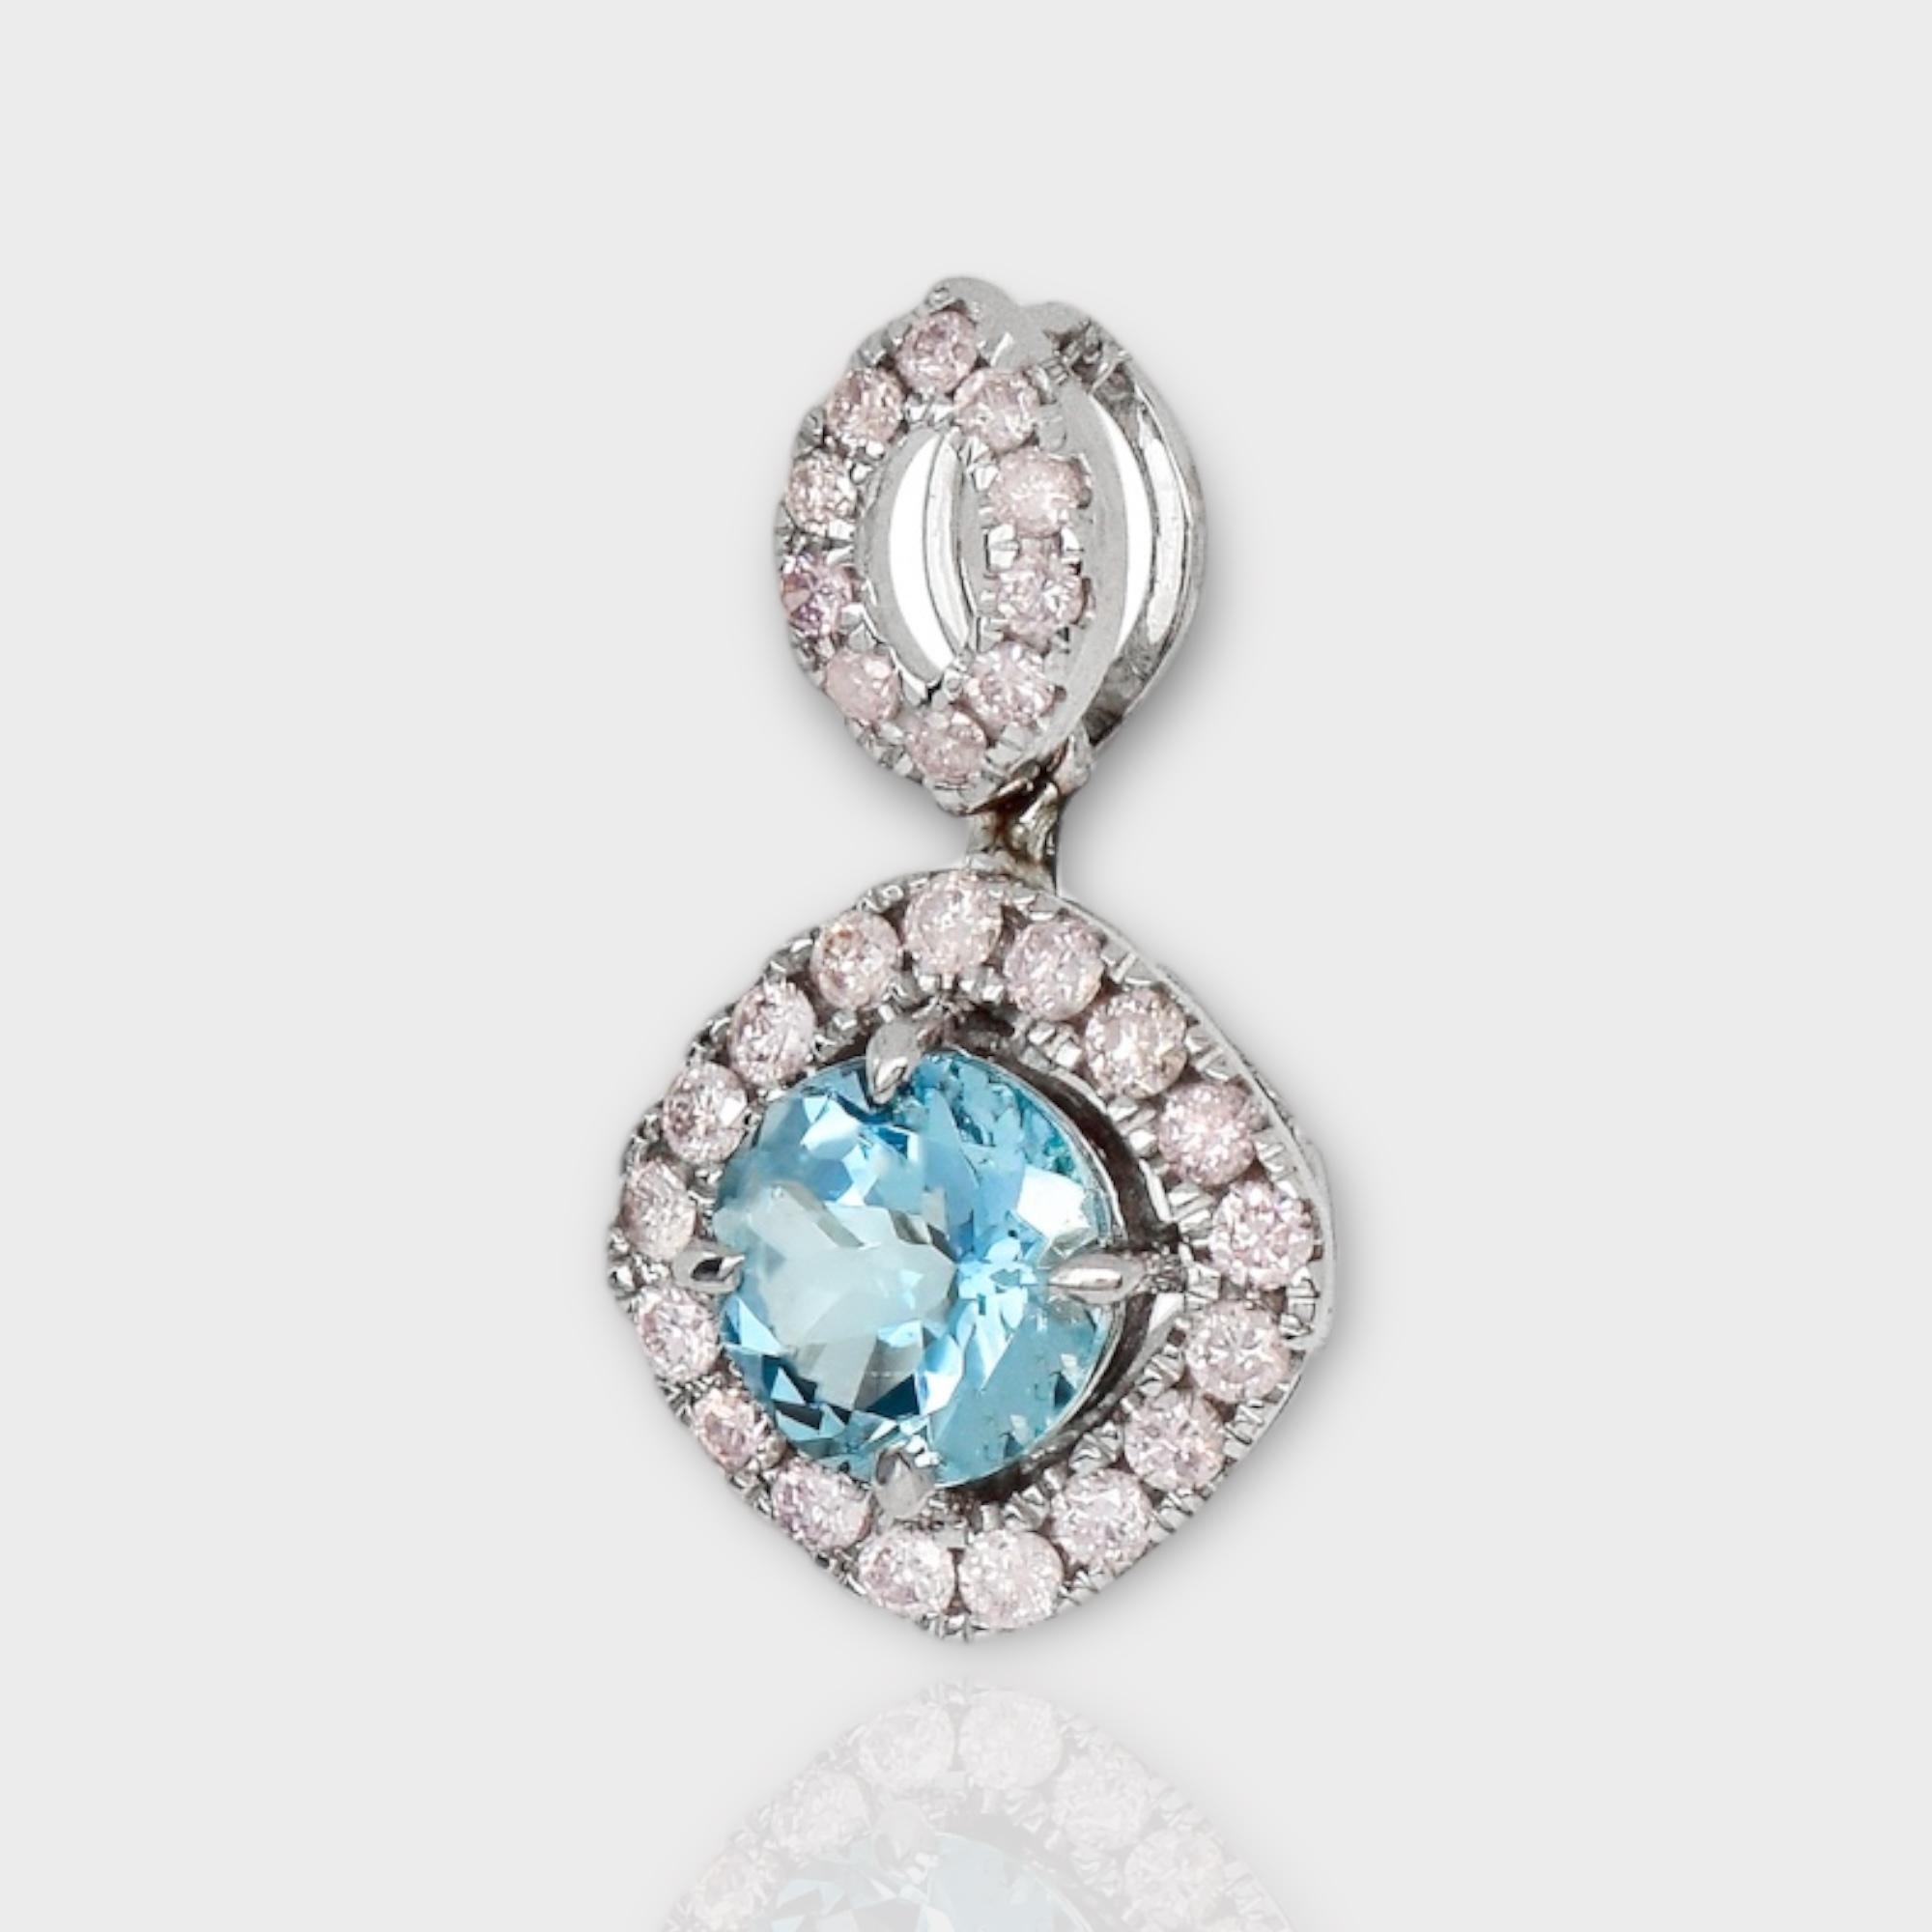 IGI 14K 0.81 Ct Aquamarine&Pink Diamonds Pendant Necklace In New Condition For Sale In Kaohsiung City, TW